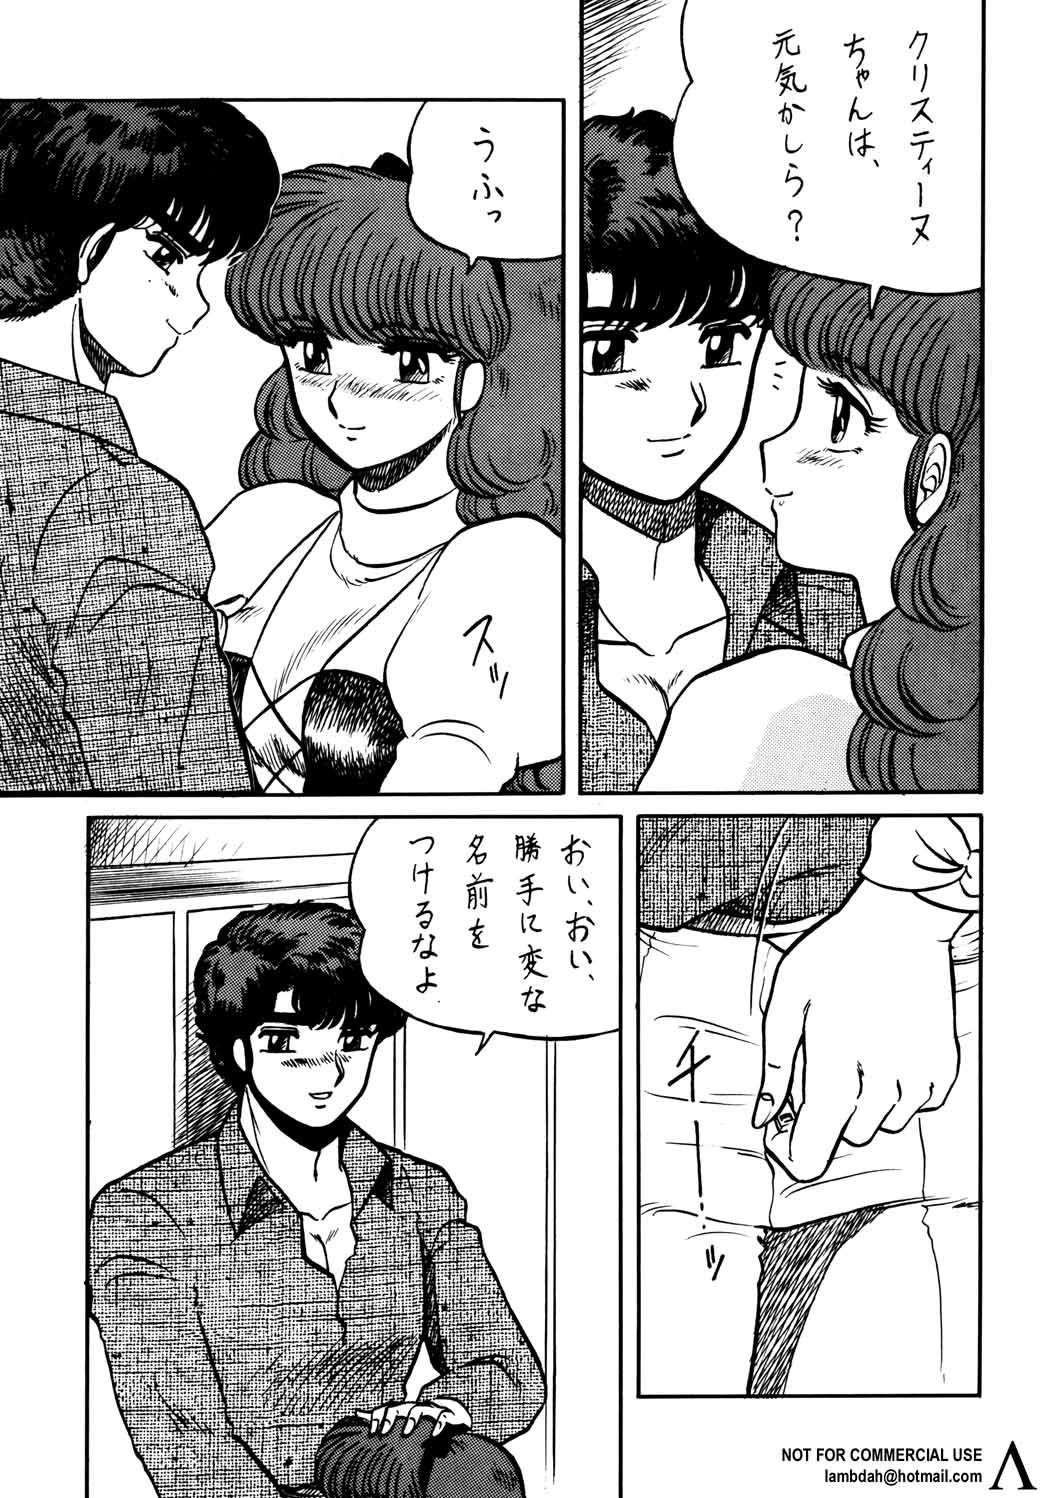 Thylinh Look Out 26 - Sailor moon Ranma 12 Video girl ai Interacial - Page 13